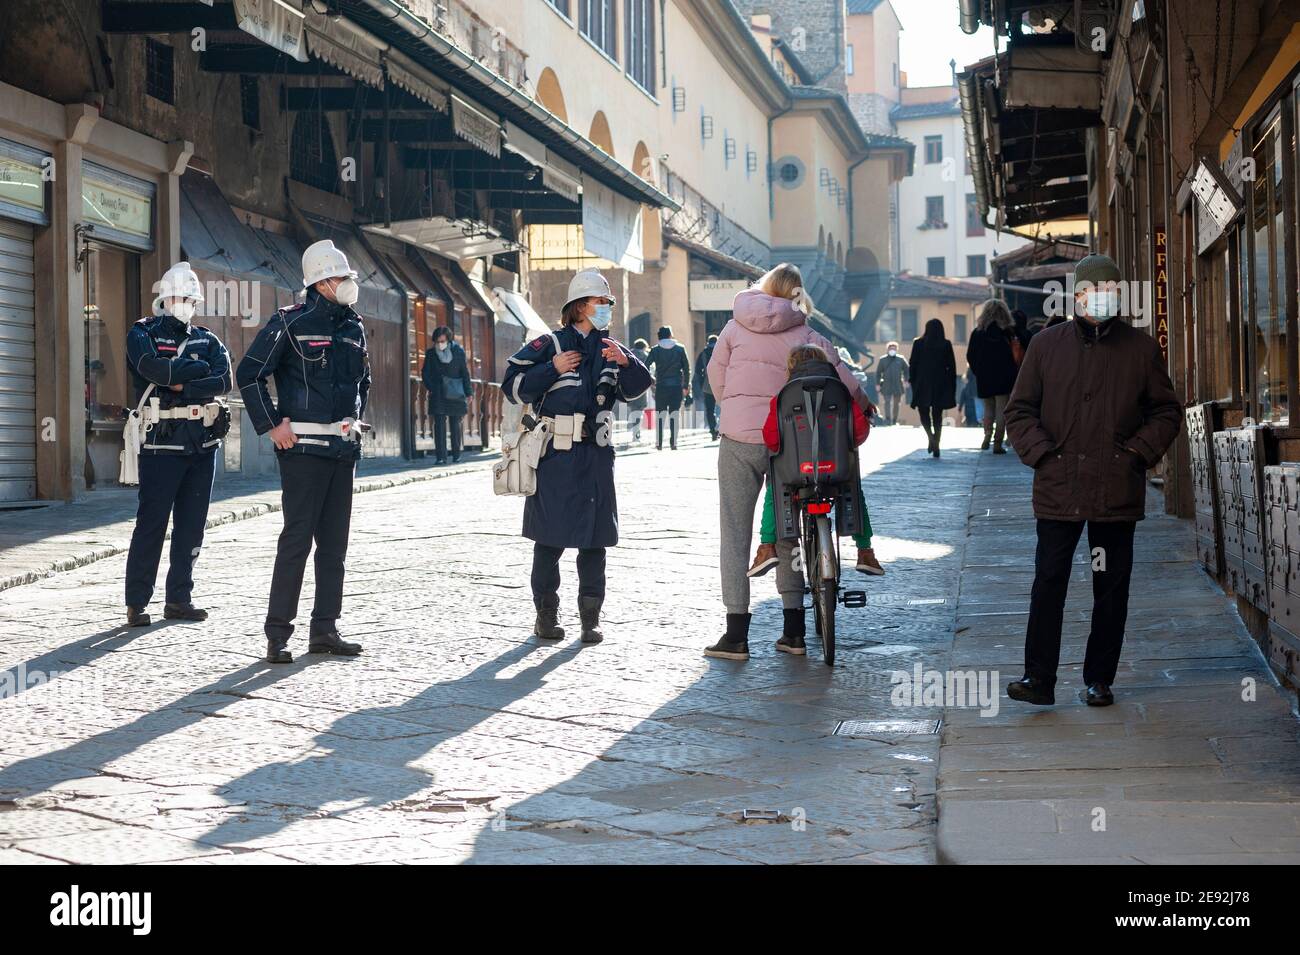 Florence, Italy - 2020, January 18: Scenes of city life in Florence, during Coronavirus pandemic. People walking on Ponte Vecchio. Police control. Stock Photo